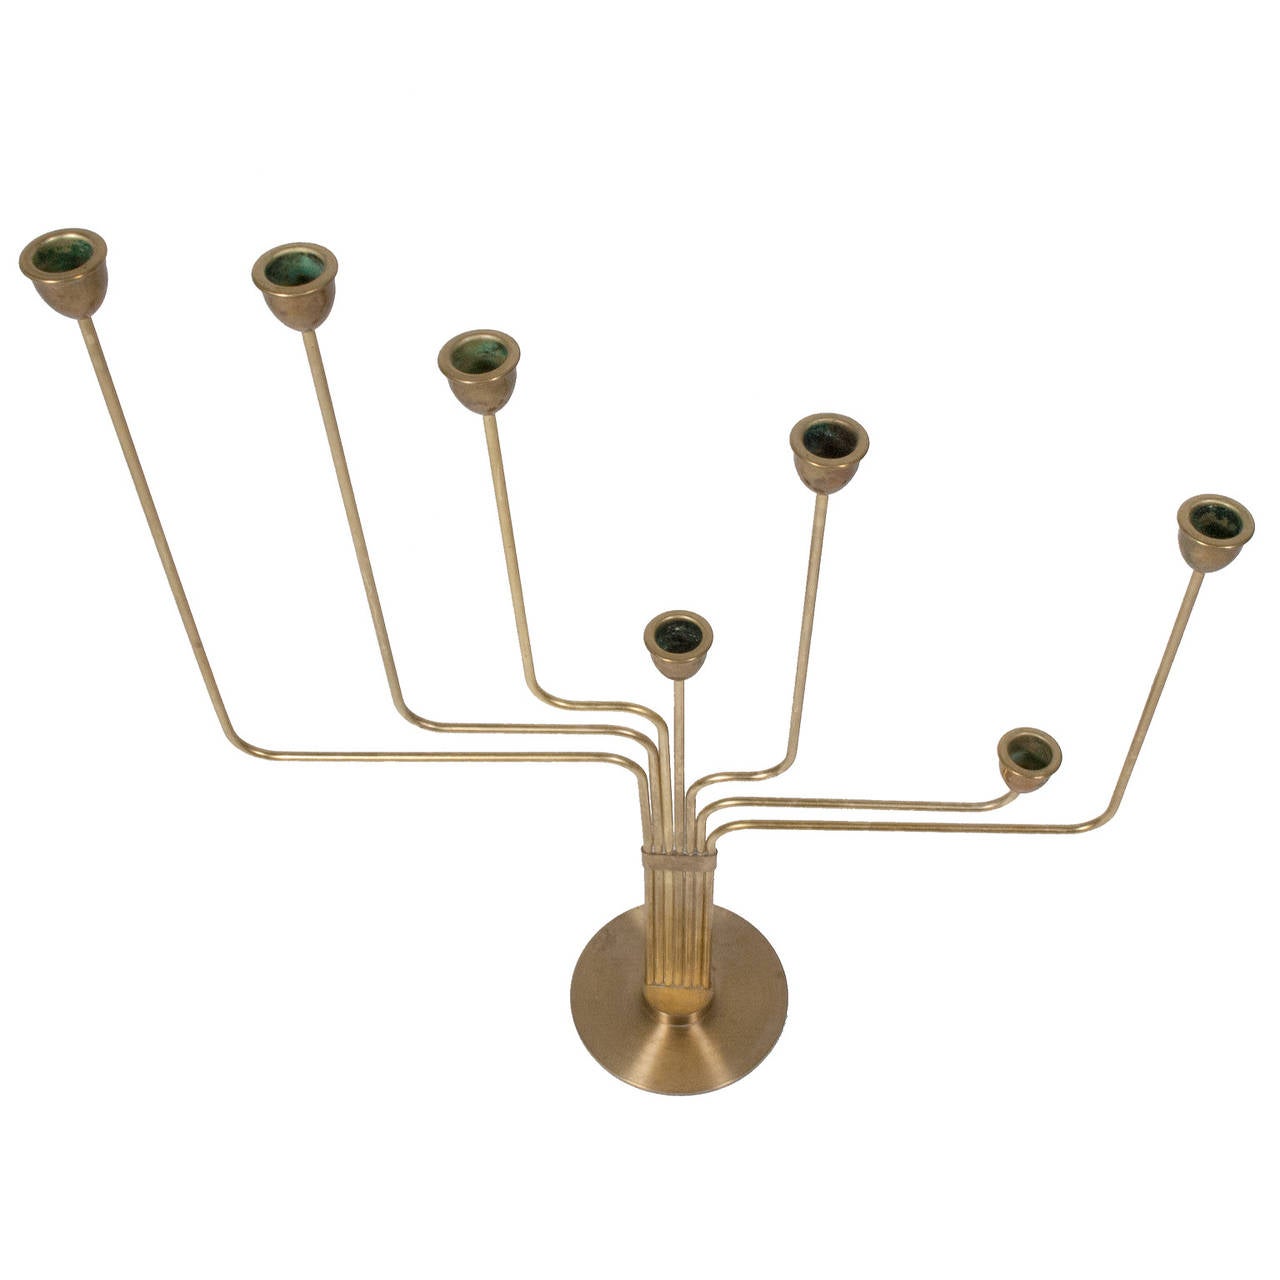 Solid brass candelabrum, created by Hein while living in Argentina. He designed this to remind him of his home in Denmark, since the star constellation is not visible in the southern hemisphere. This is the first model designed of his candelabrum;